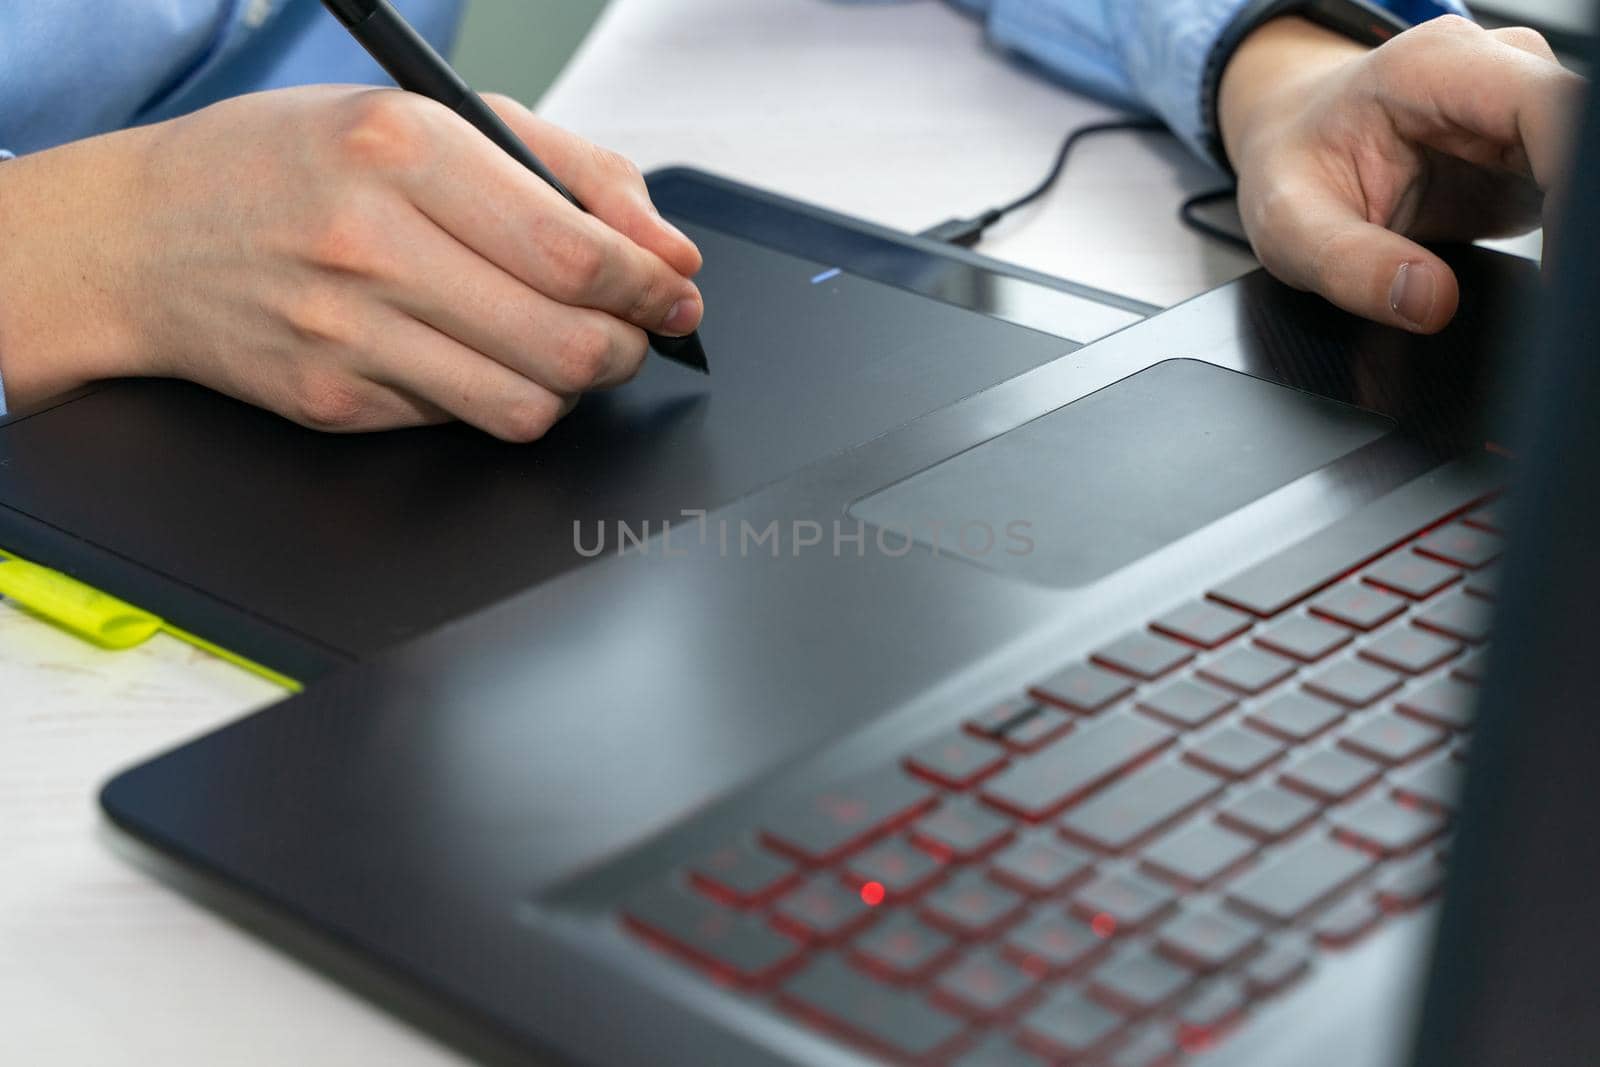 Graphic designer using digital tablet and computer in office. hands close up